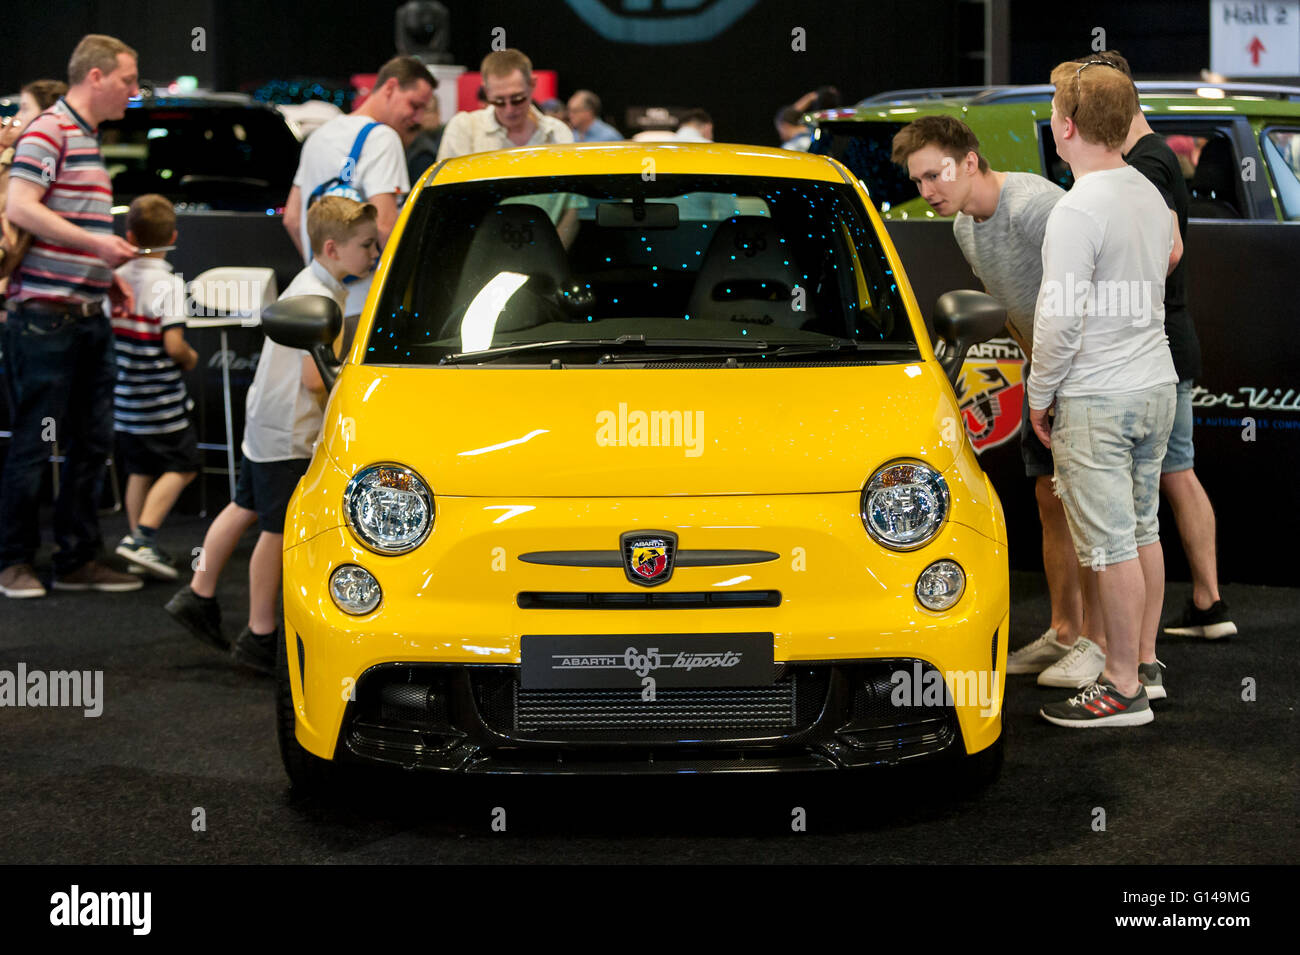 London Uk 8 May 16 A Bright Yellow Fiat Abarth 695 Attracts Stock Photo Alamy